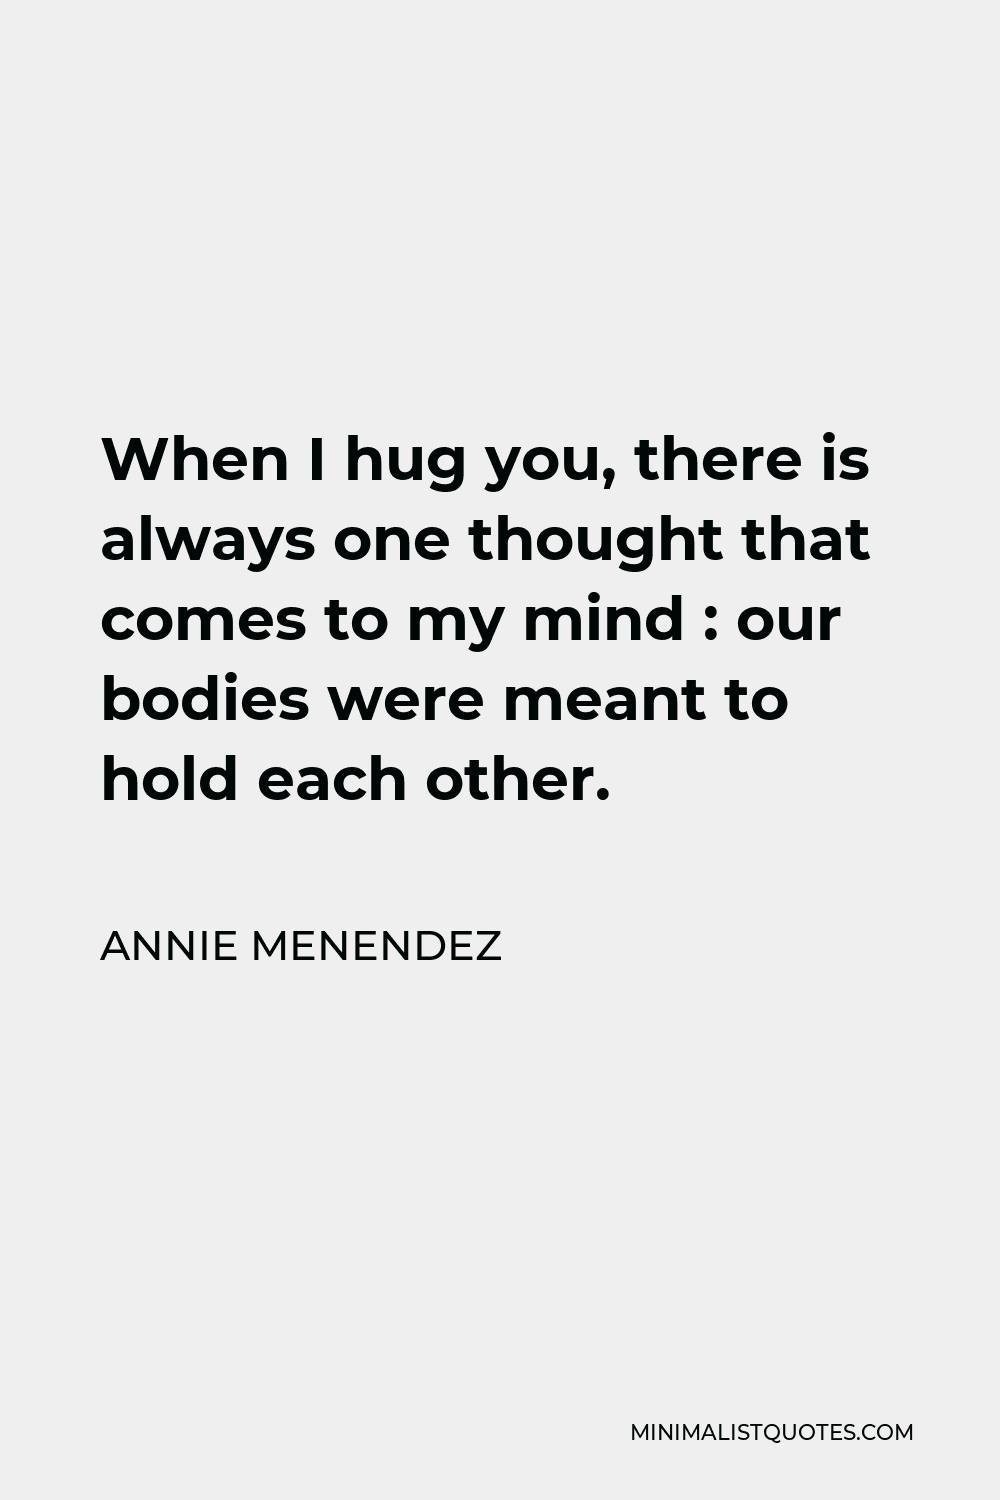 Annie Menendez Quote - When I hug you, there is always one thought that comes to my mind : our bodies were meant to hold each other.